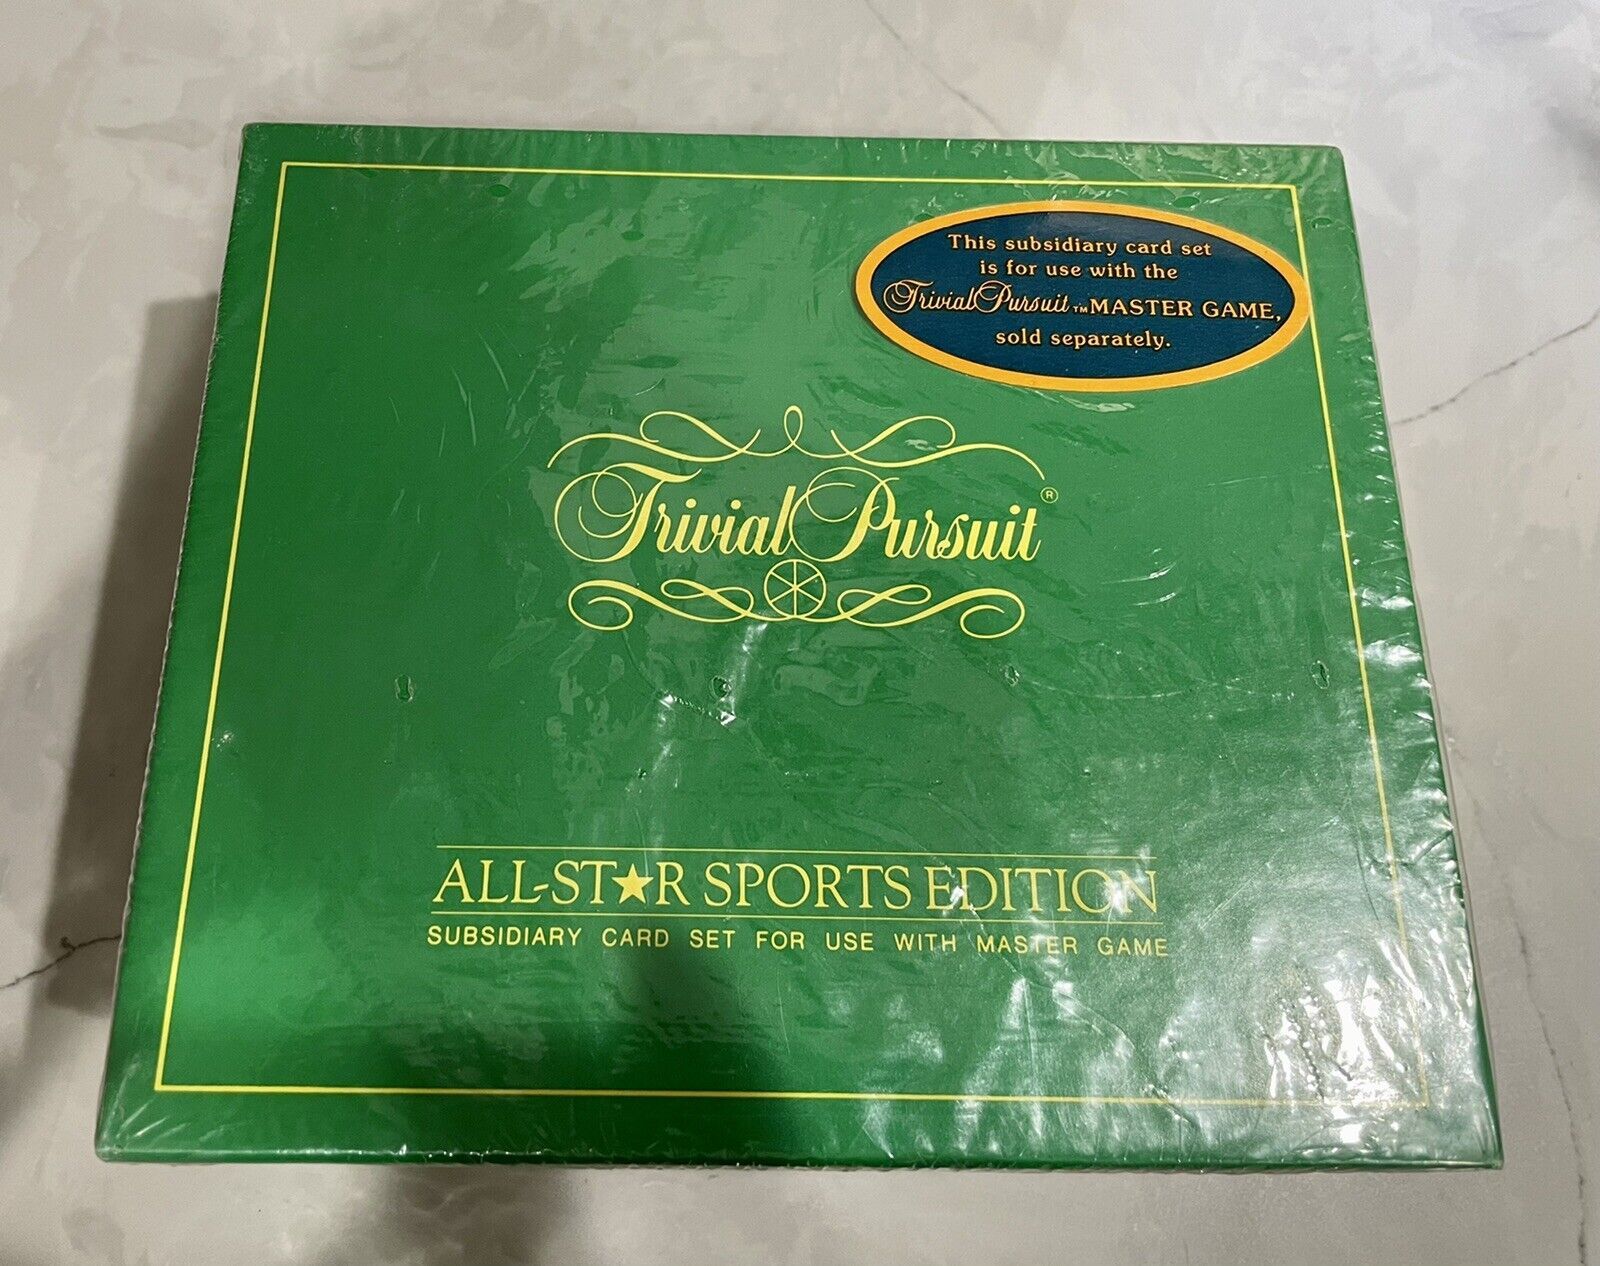 Trivial Pursuit Baby Boomer 1981 All Star Sports Edition Subsidiary Card Sets - $12.43